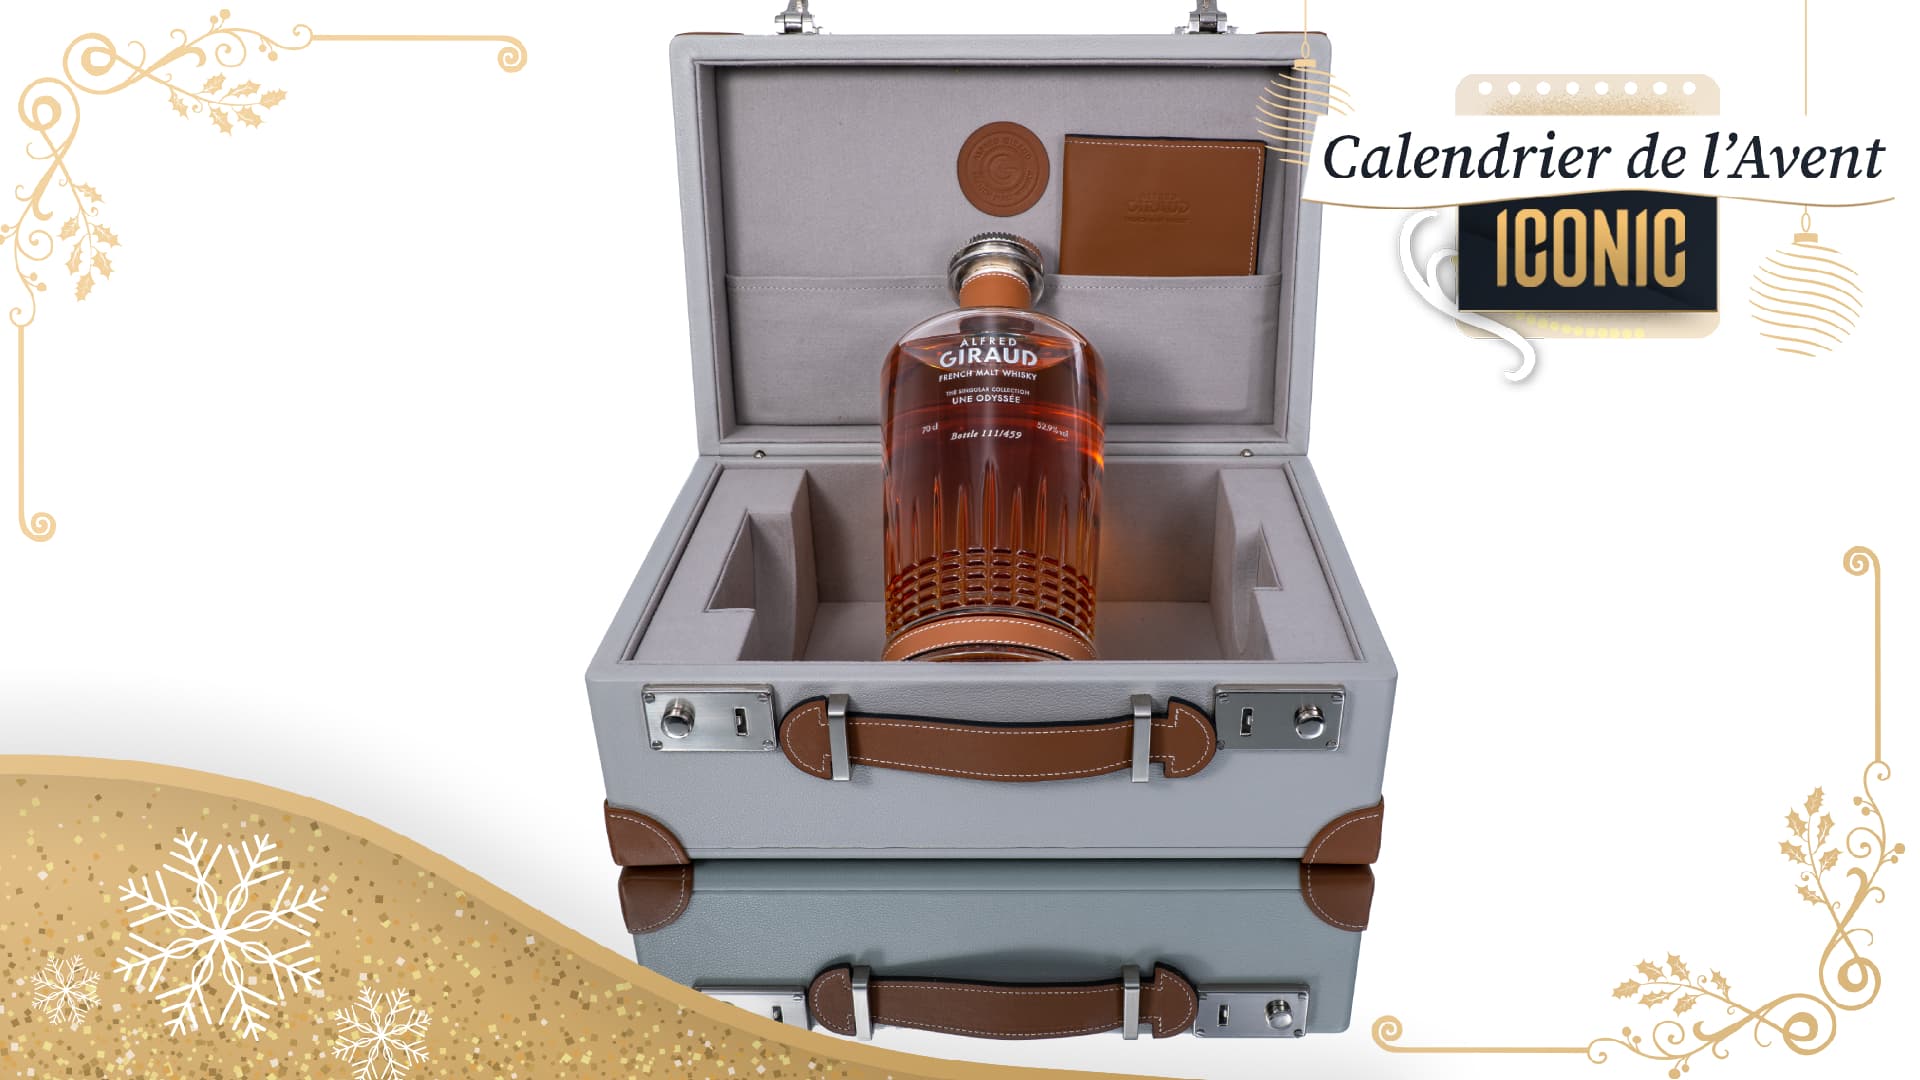 Whisky Voyage Coffret - Alfred Giraud